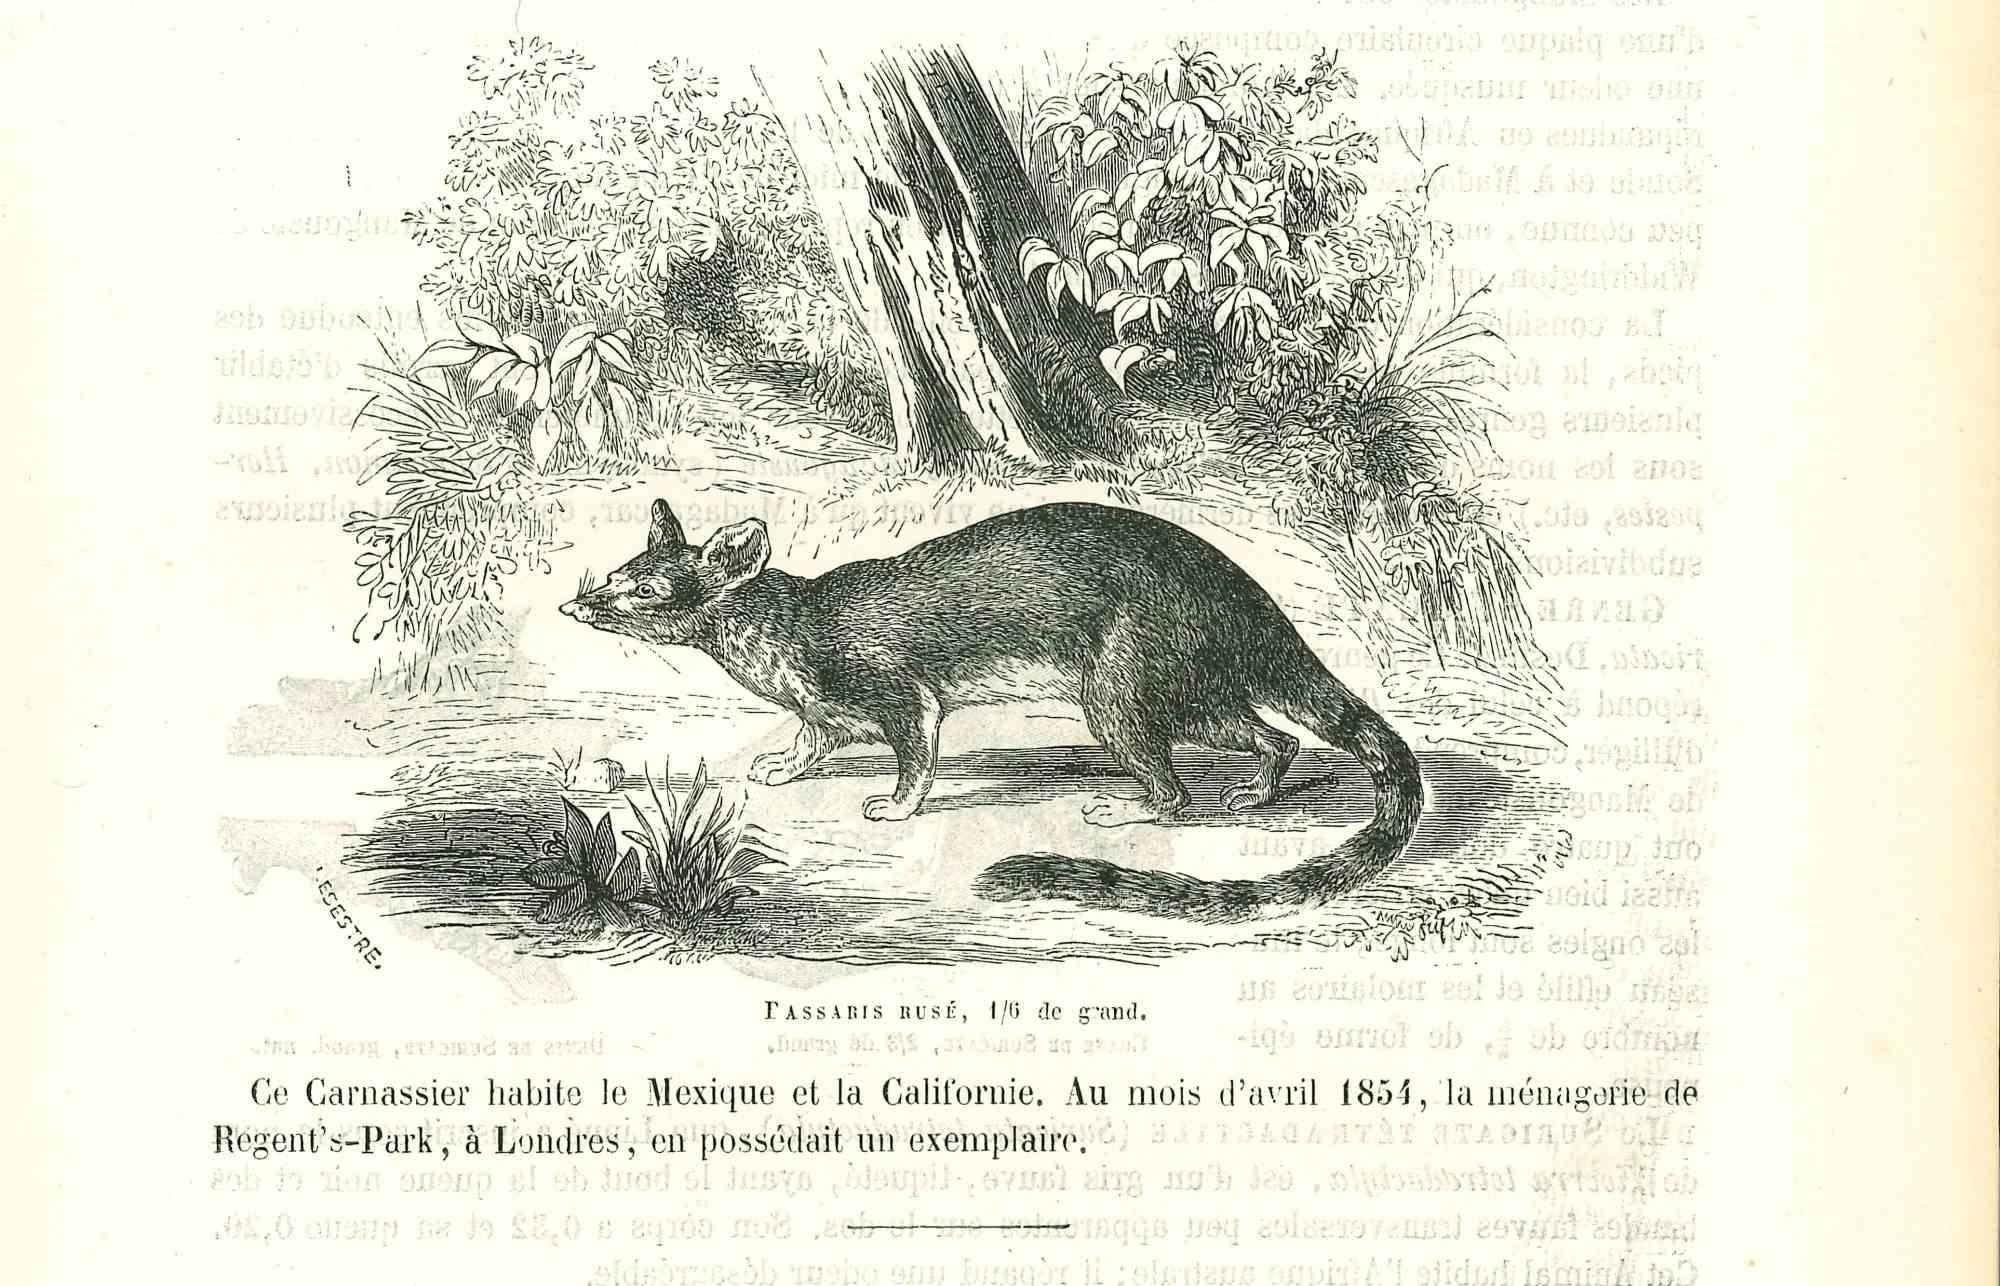 The Mouse - Lithograph by Paul Gervais - 1854